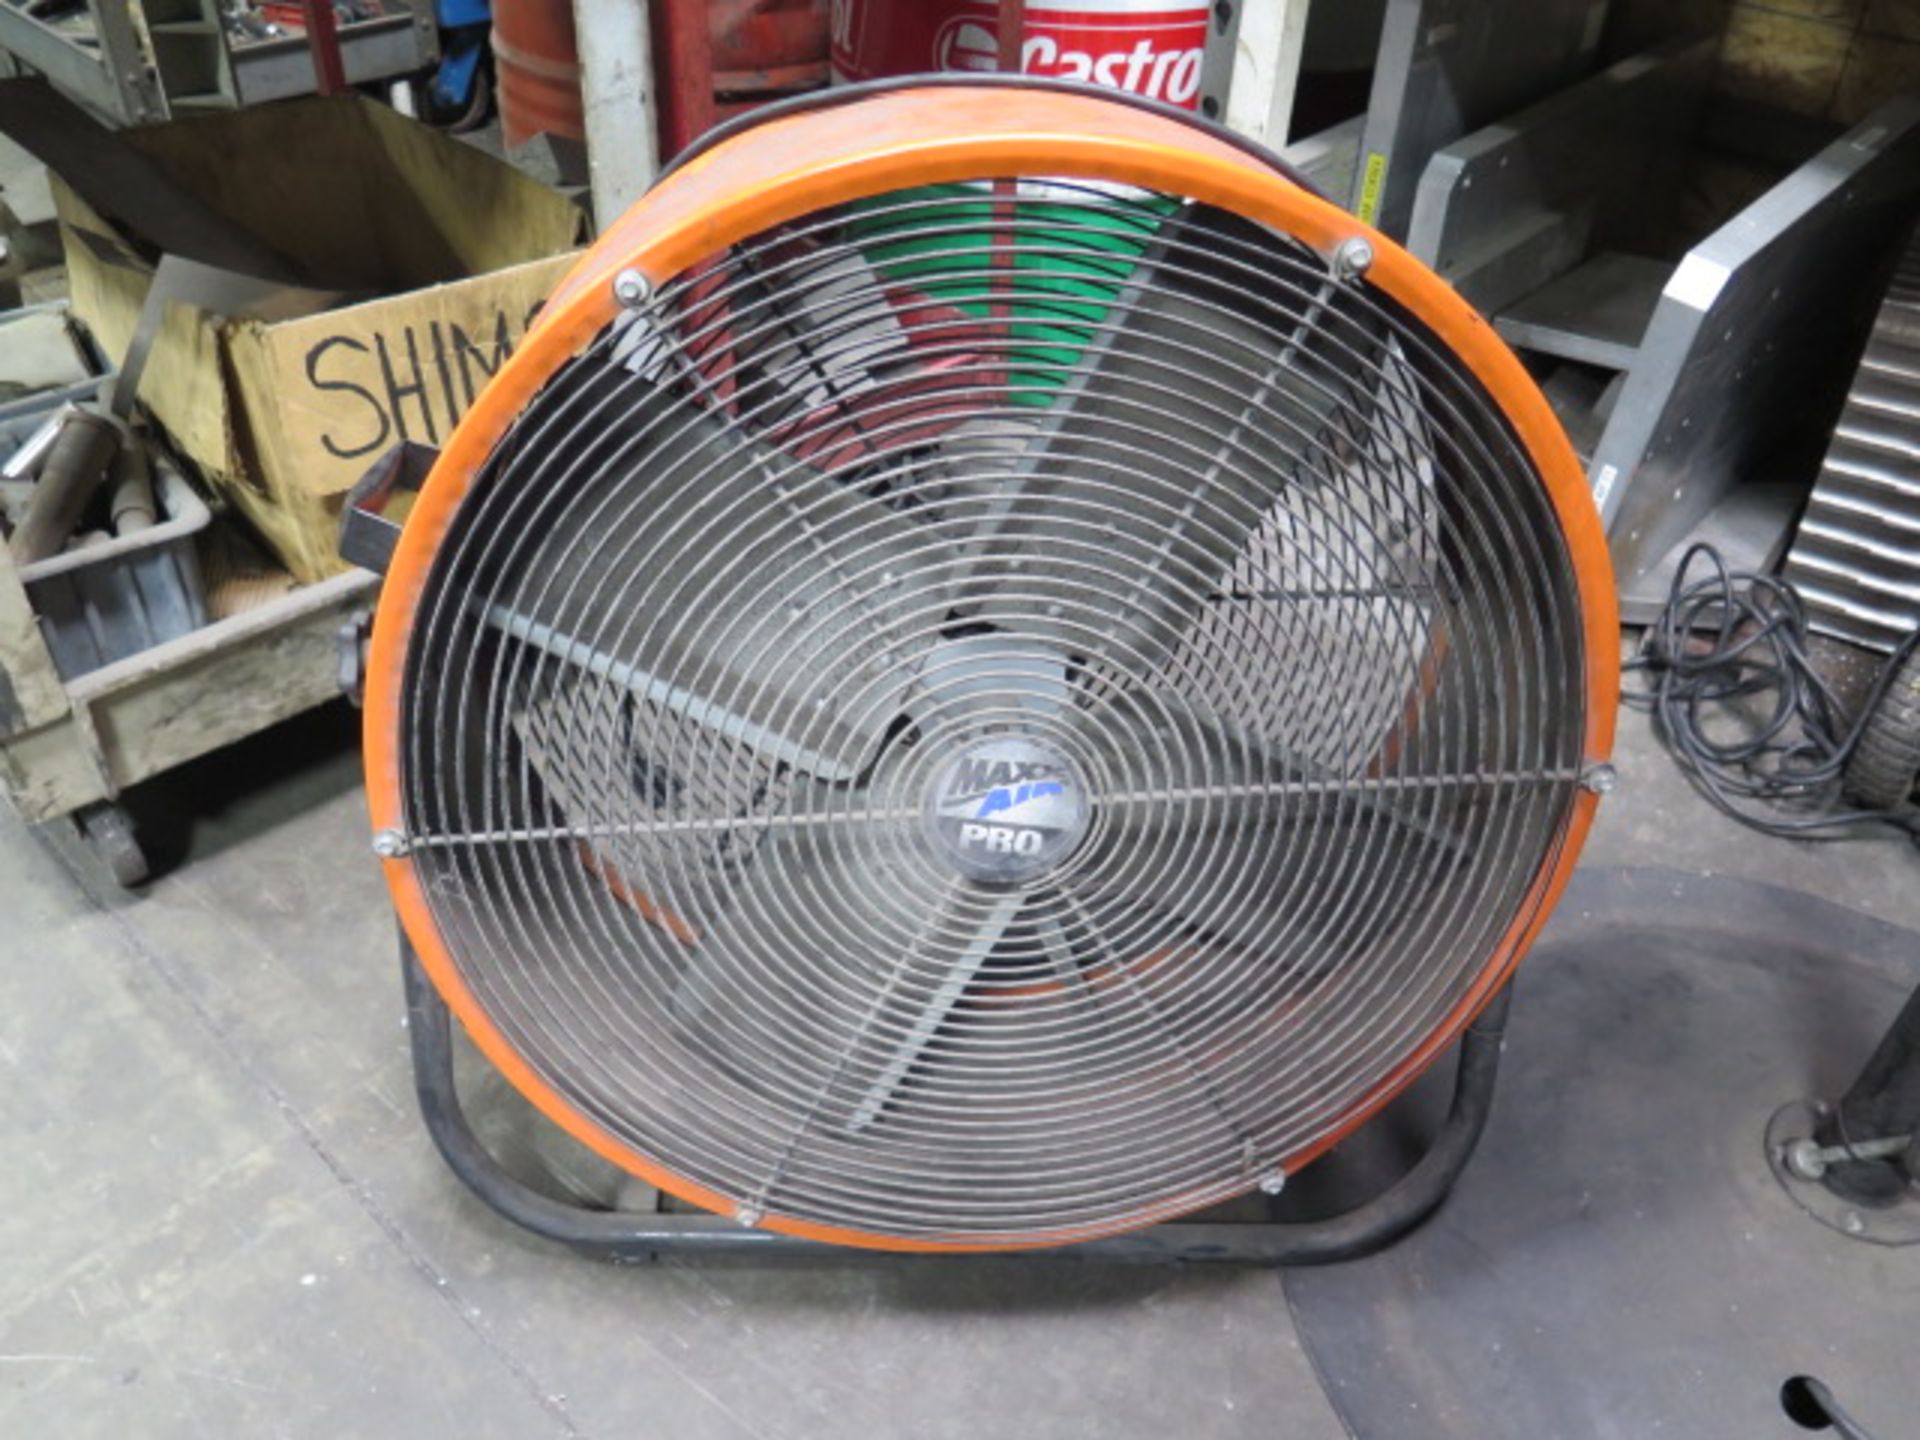 Shop Fans (2) (SOLD AS-IS - NO WARRANTY) - Image 4 of 5